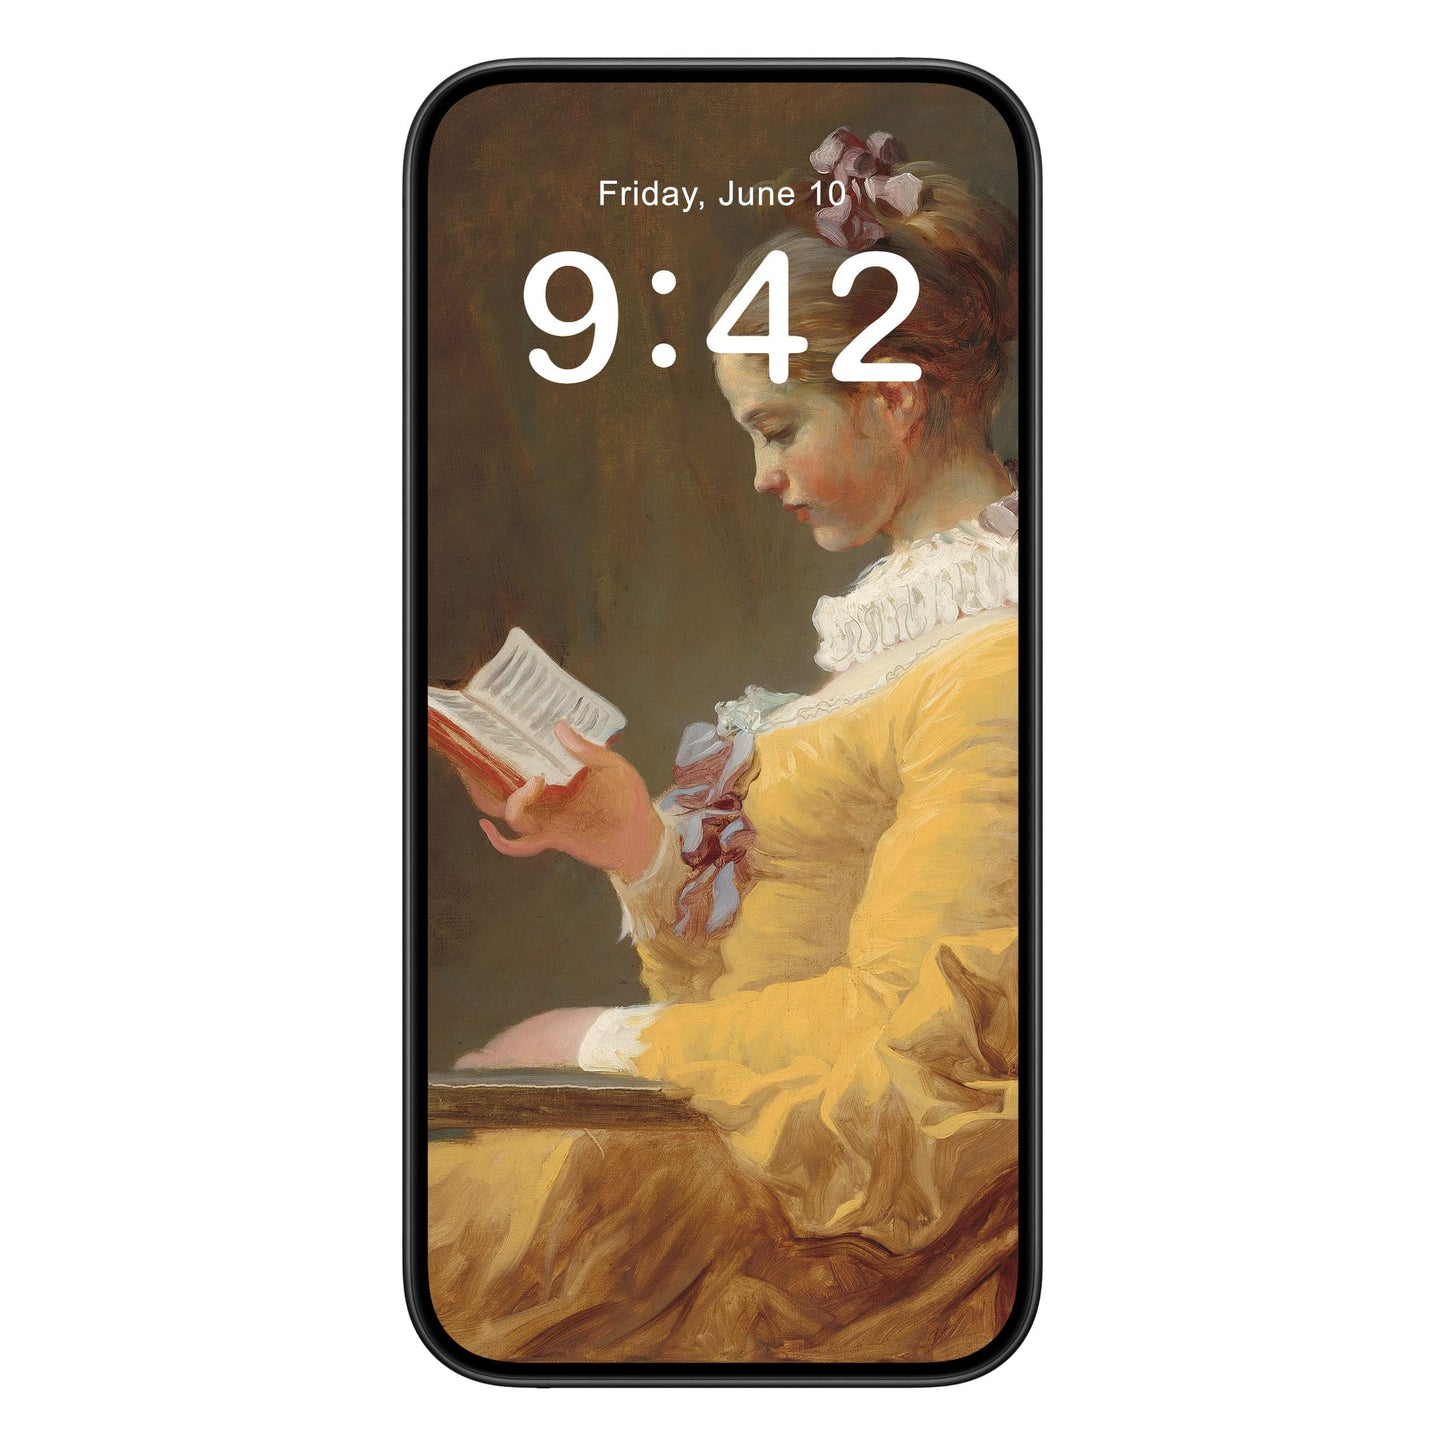 Reading Aesthetic phone wallpaper background with light academia design shown on a phone lock screen, instant download available.